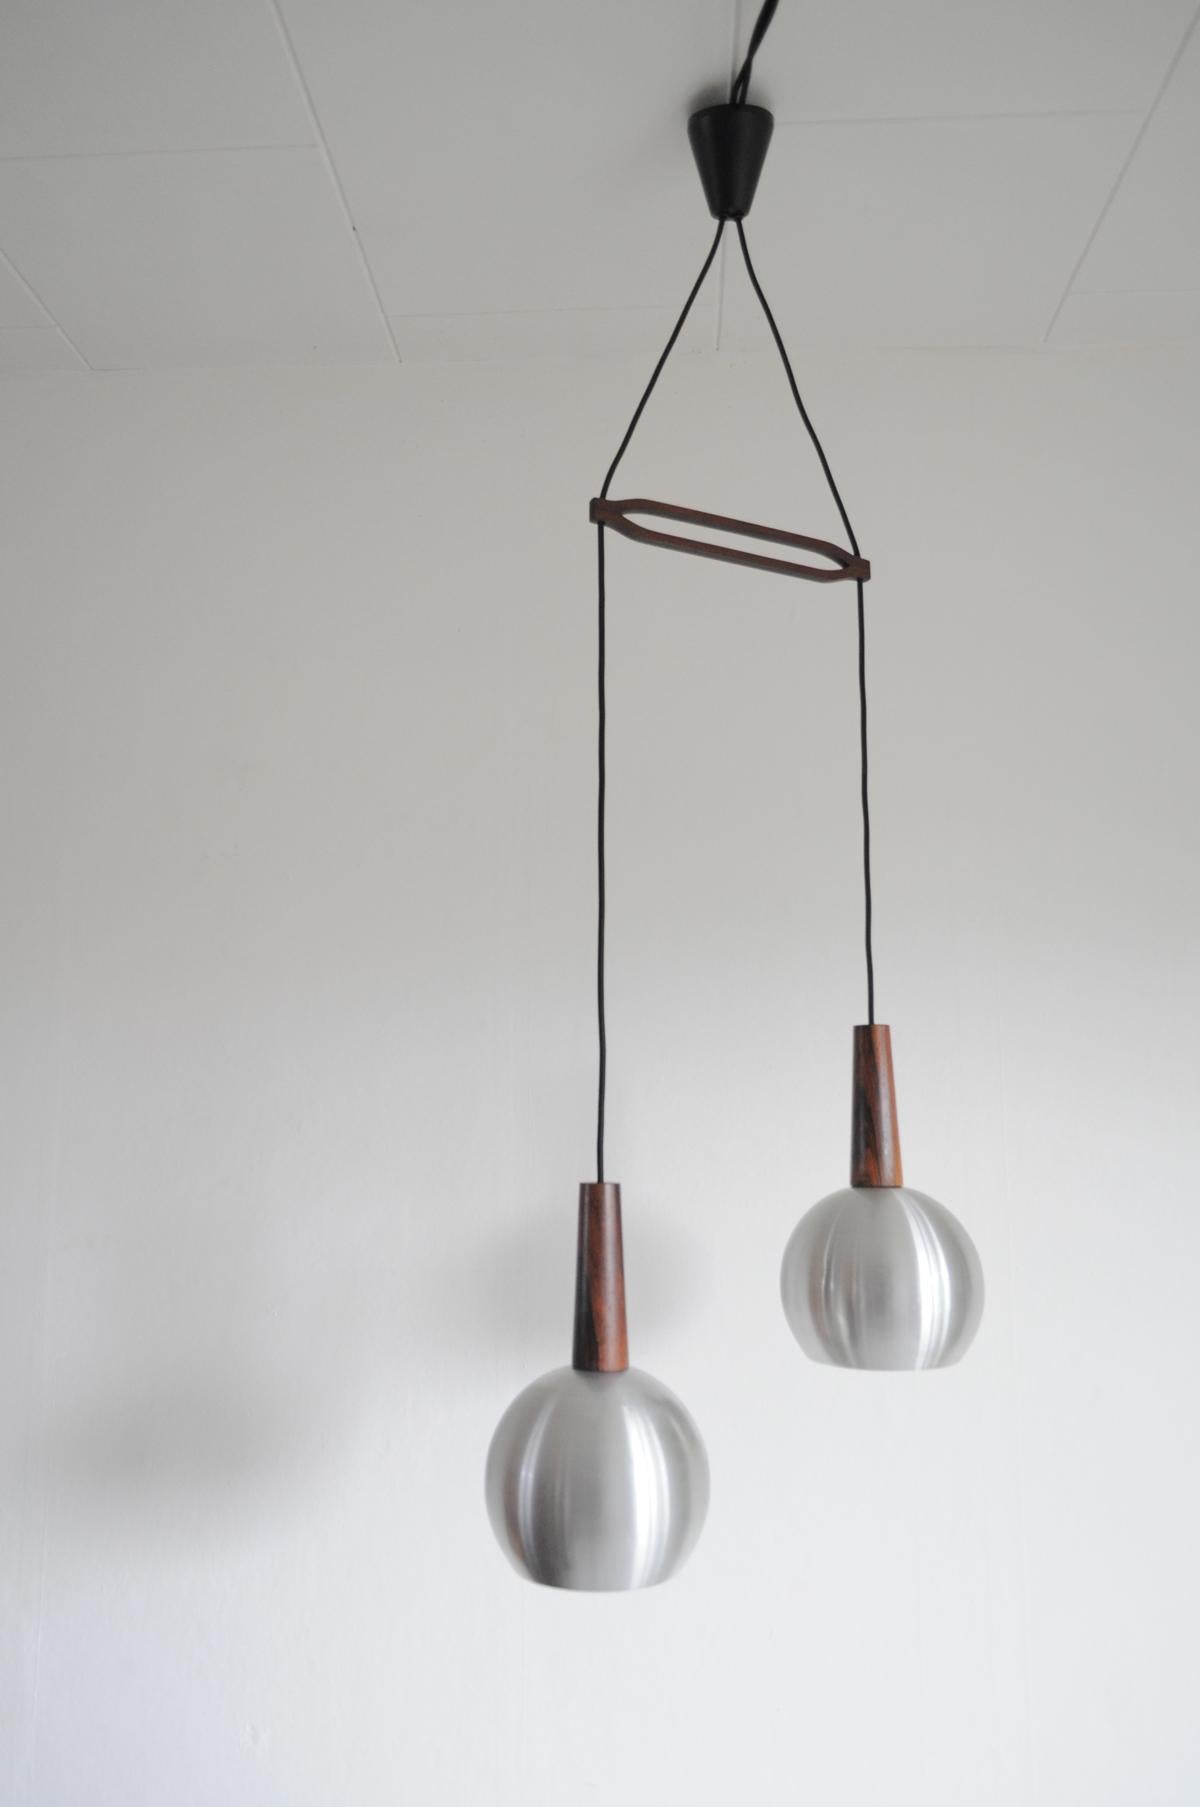 Danish Modern pendant lamps with details in rosewood in the style of Verner Panton from the 1960s.
Signs of wear consistent with age and use. We recommend repainting of the innershade, please contact us regarding this.

Dimensions:
Full length as